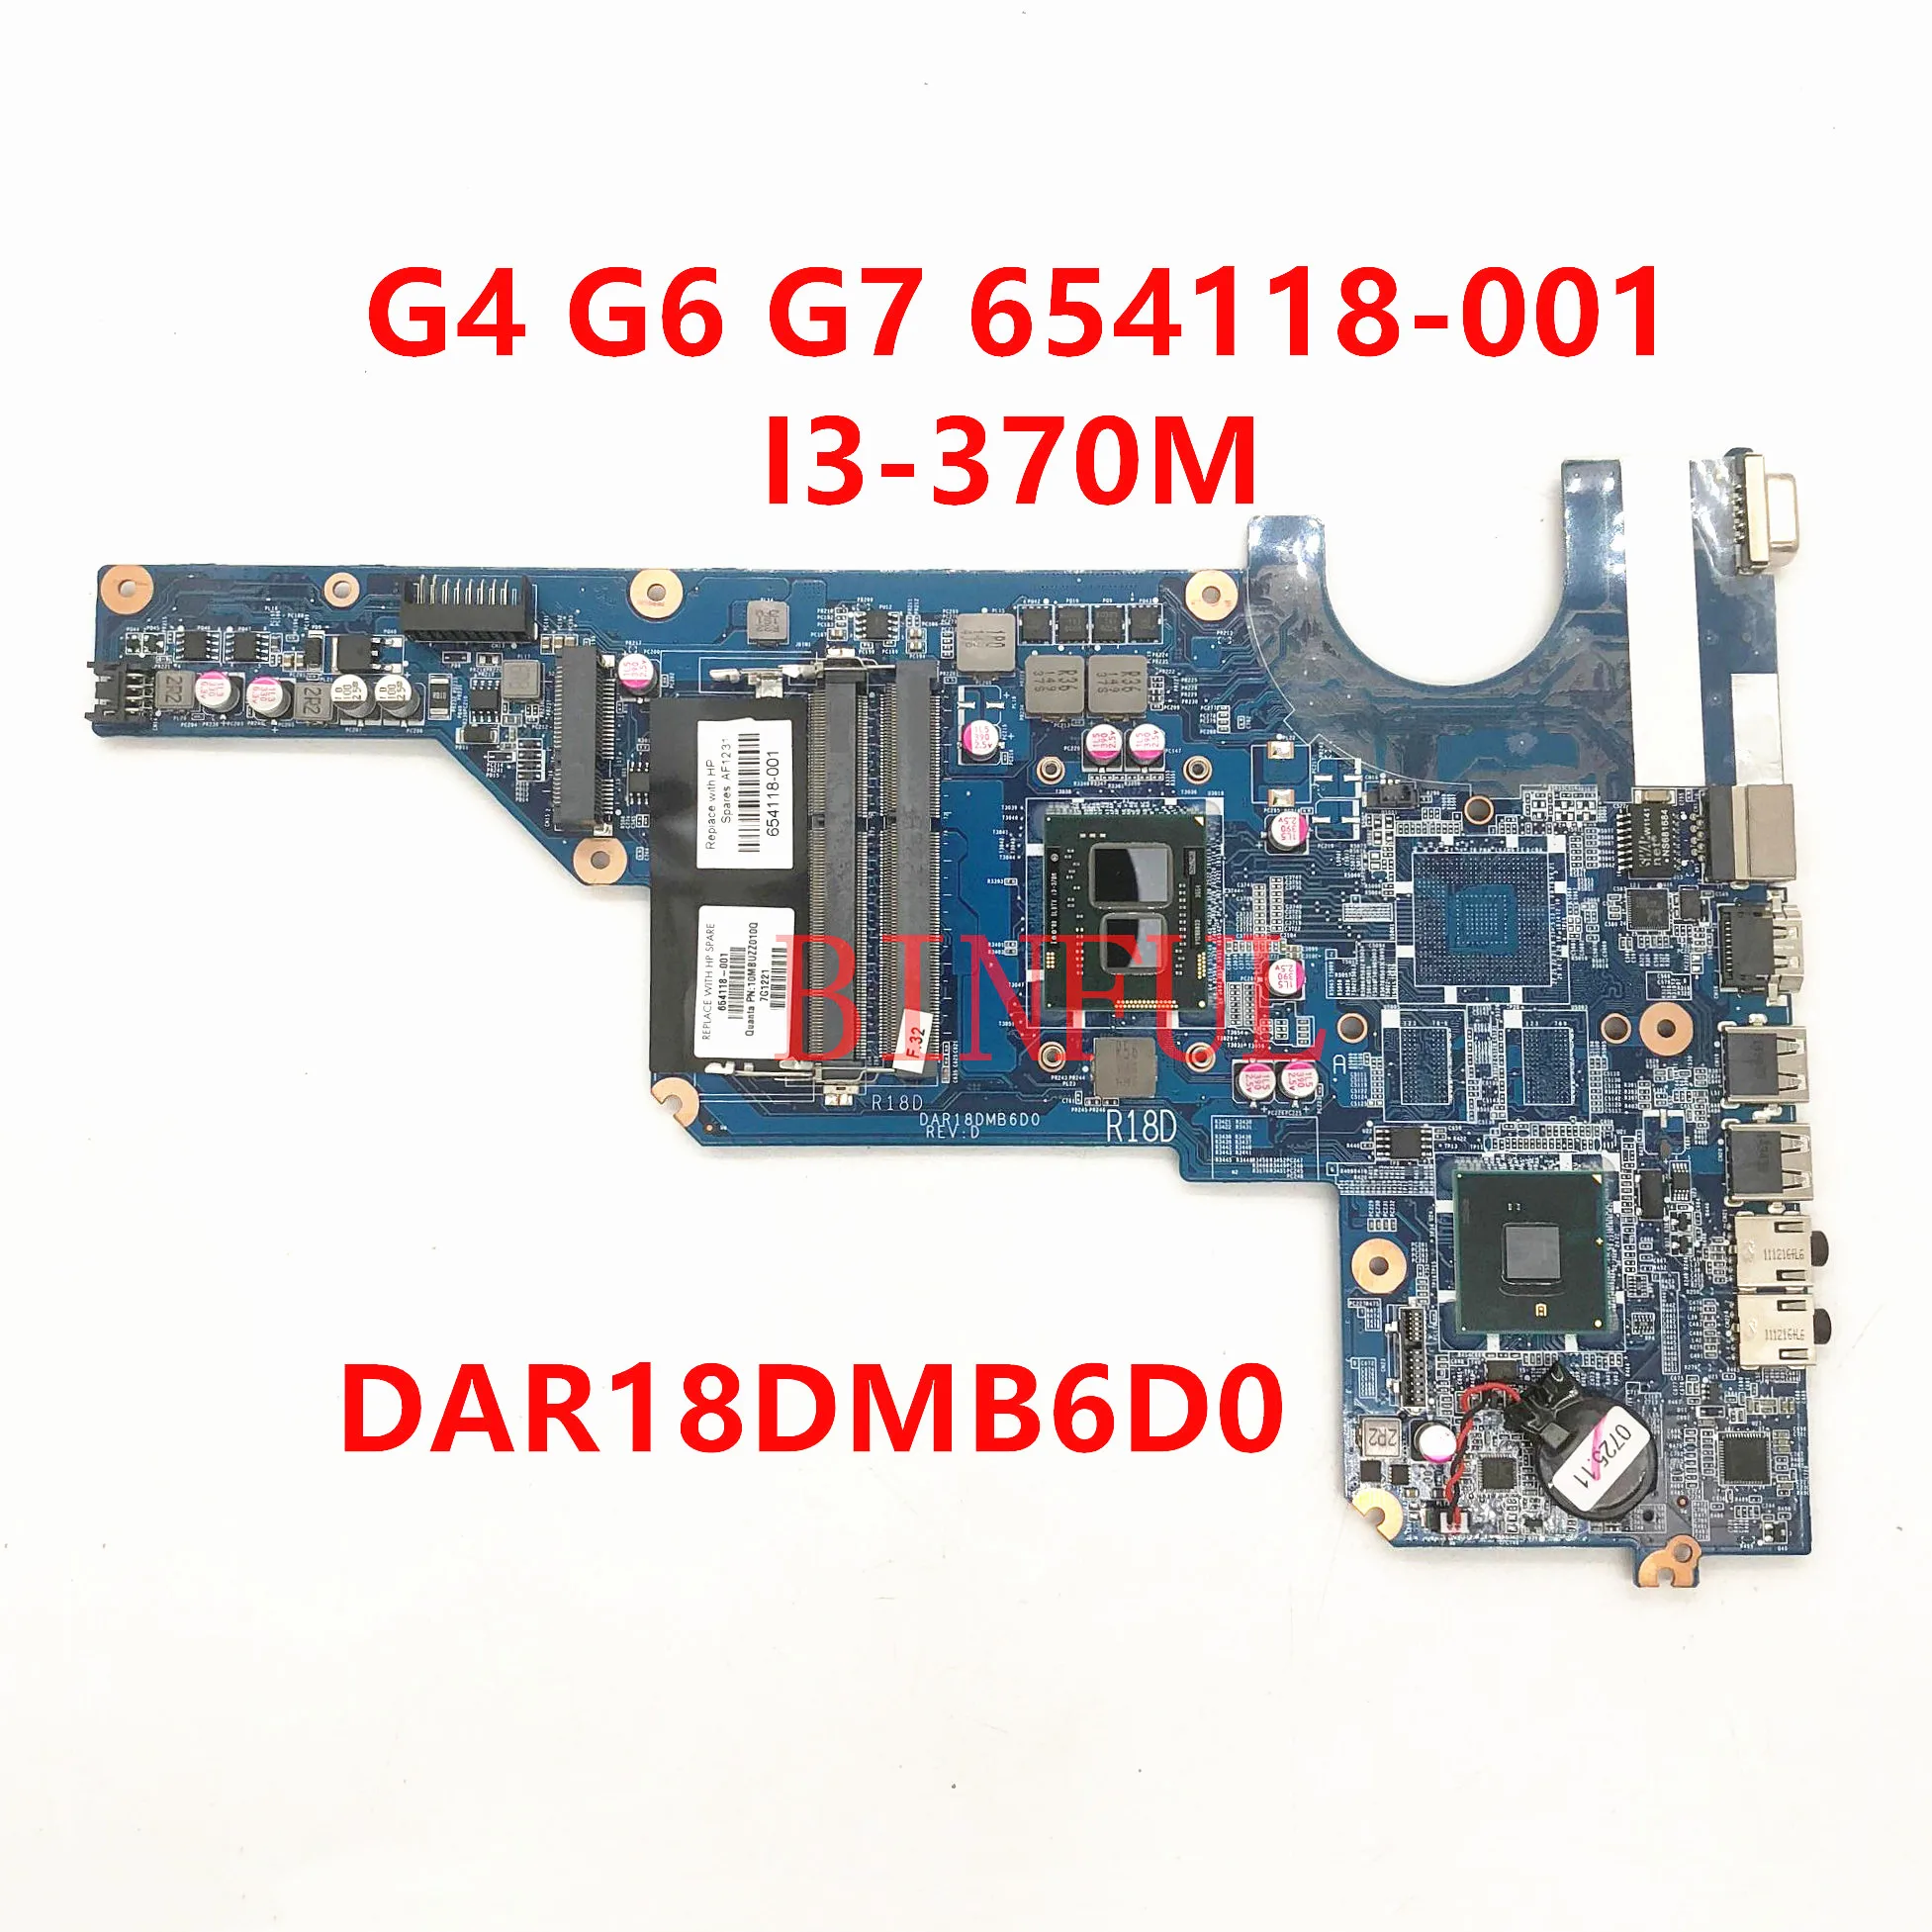 High Quality For HP G7 G6 G4 G4-1000 G6-1000 Laptop Motherboard 654118-001 DAR18DMB6D0 With I3-370M CPU HM55 100% Full Tested OK